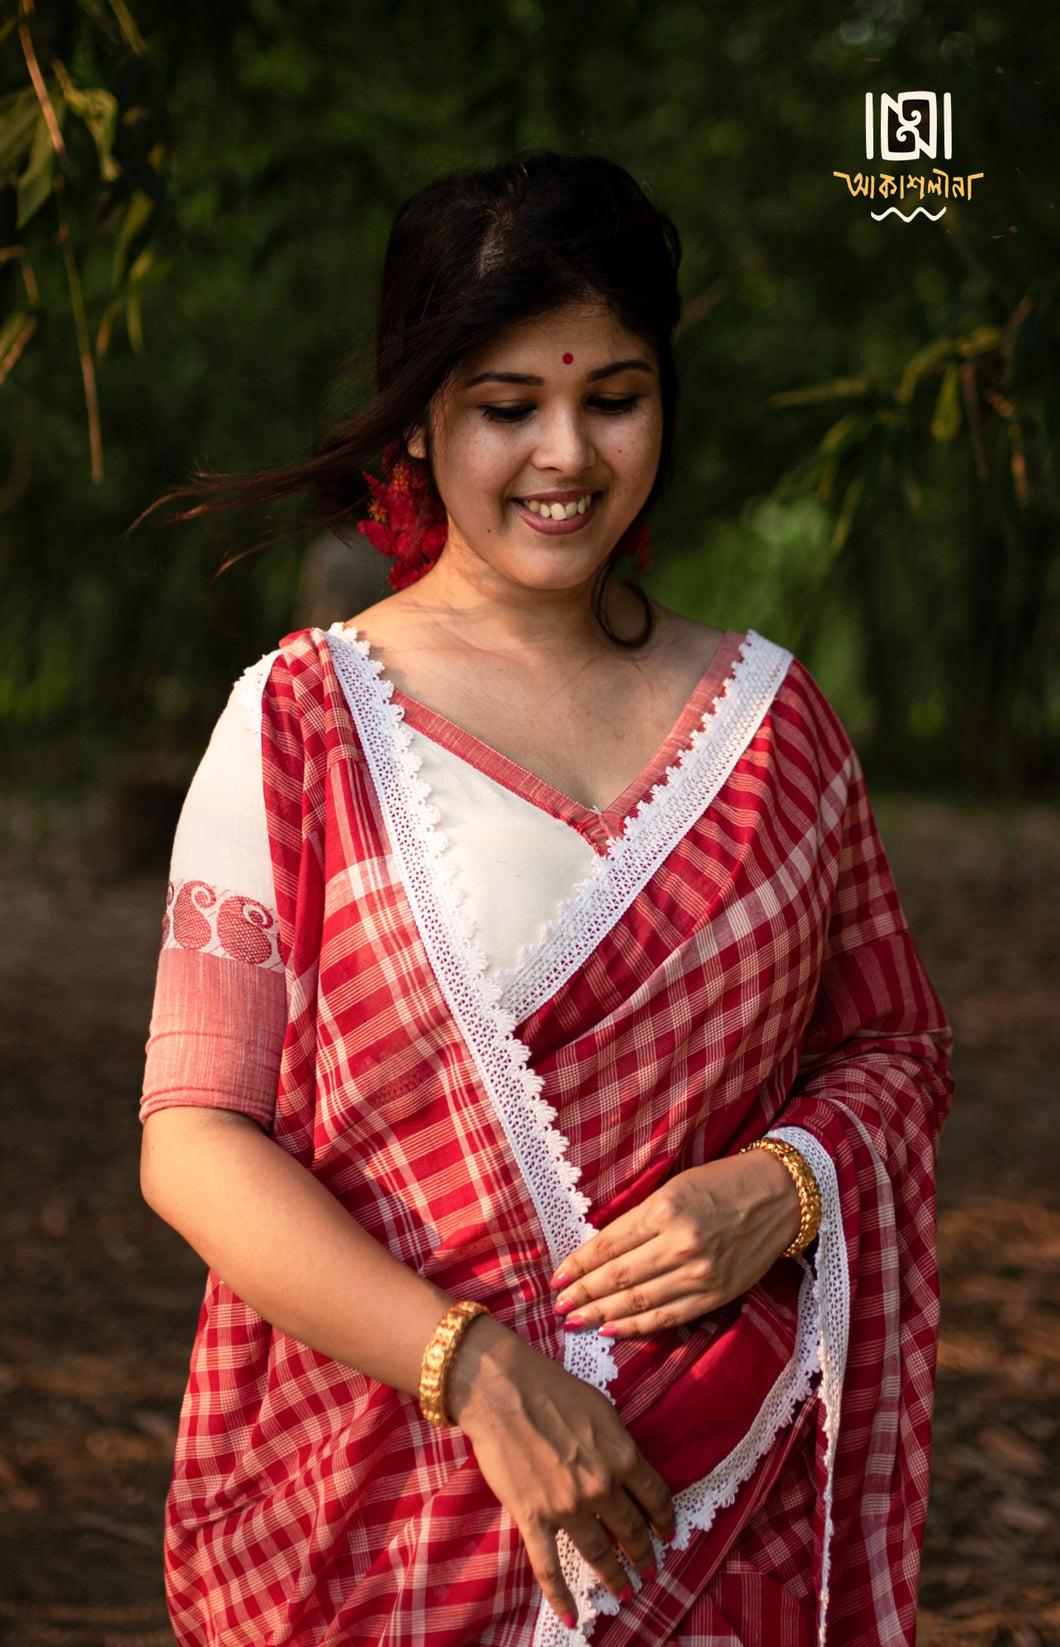 Red gamcha Saree With Cotton Lace Border